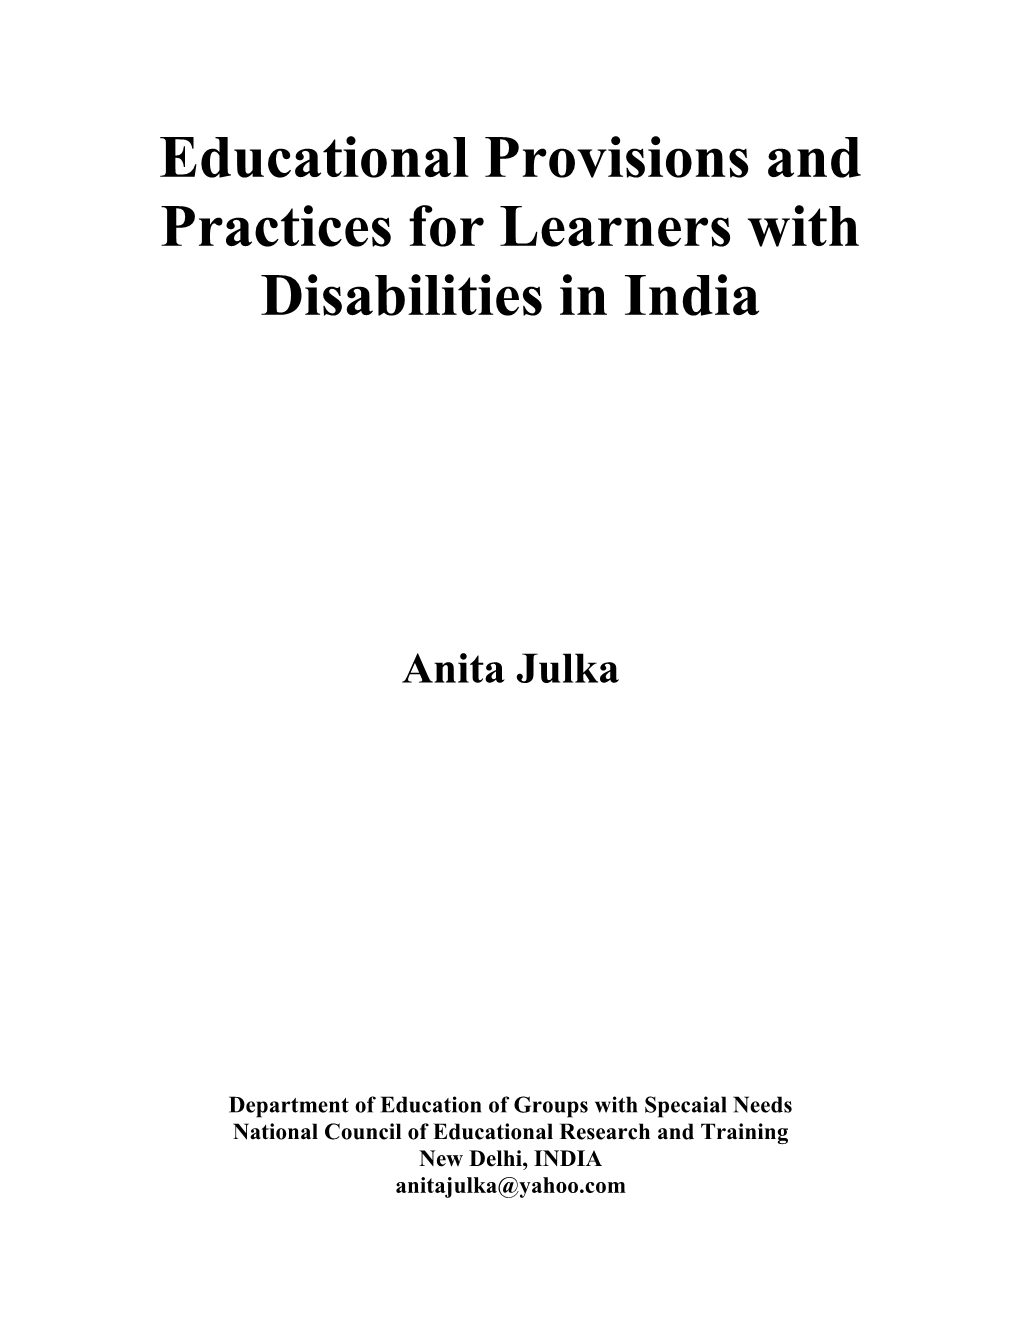 Educational Provisions and Practices for Learners with Disabilities in India